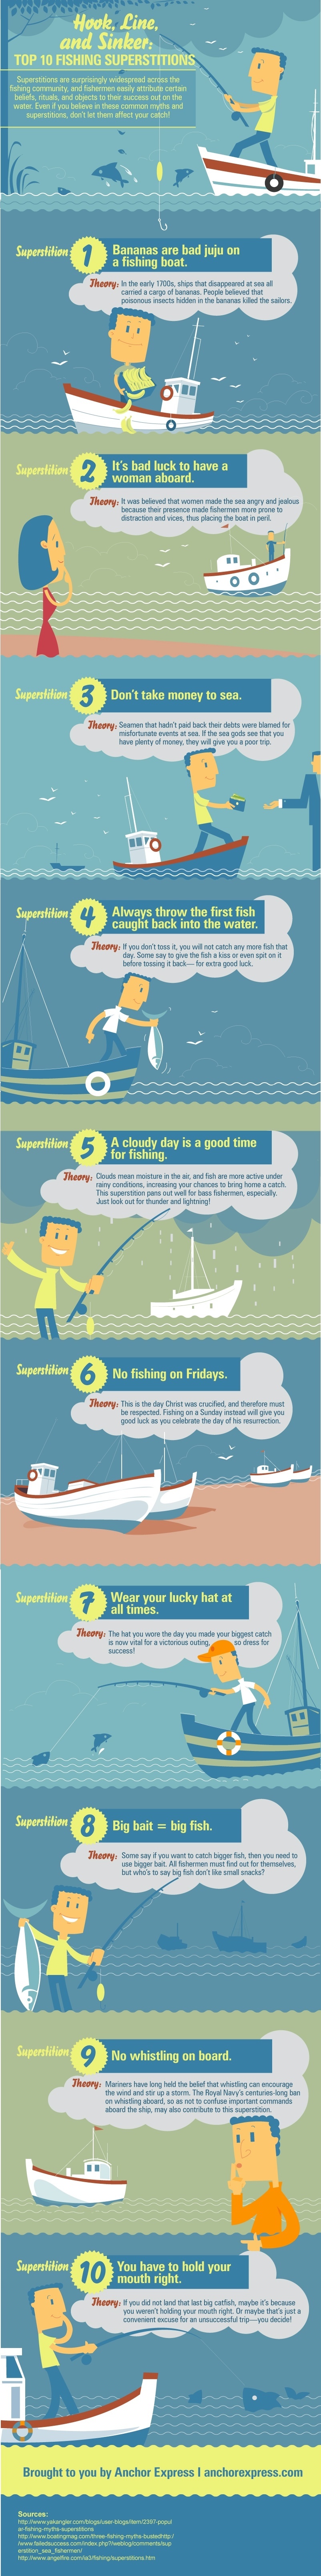 1406_graphic-anchor-express-fishing-superstitions_v2